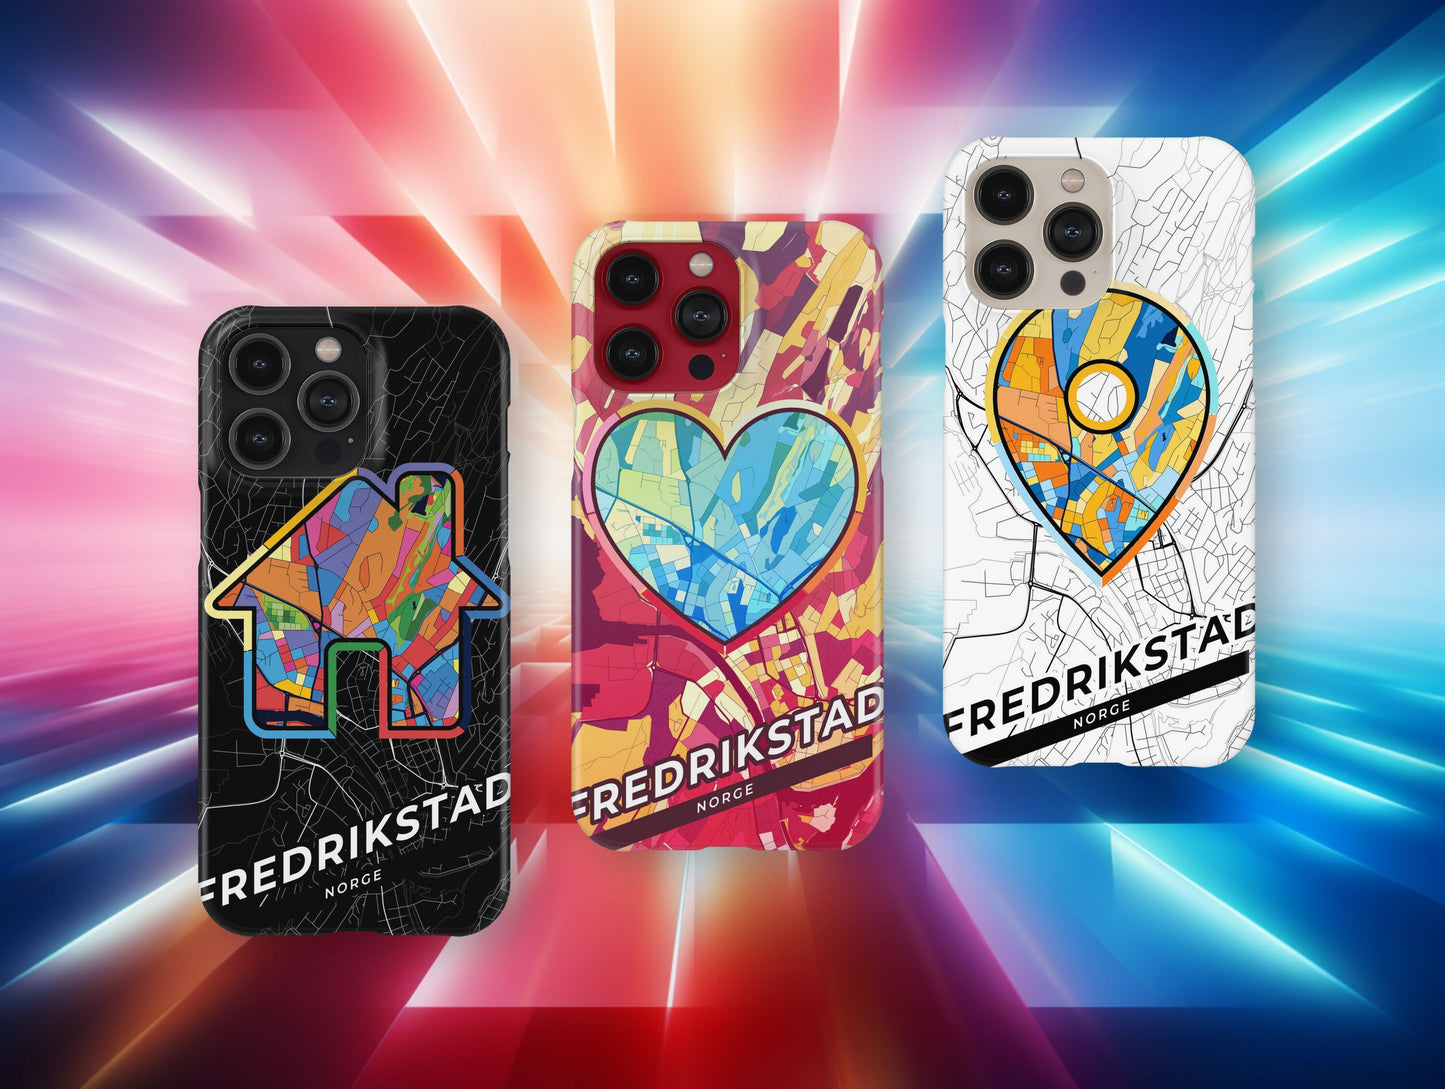 Fredrikstad Norway slim phone case with colorful icon. Birthday, wedding or housewarming gift. Couple match cases.